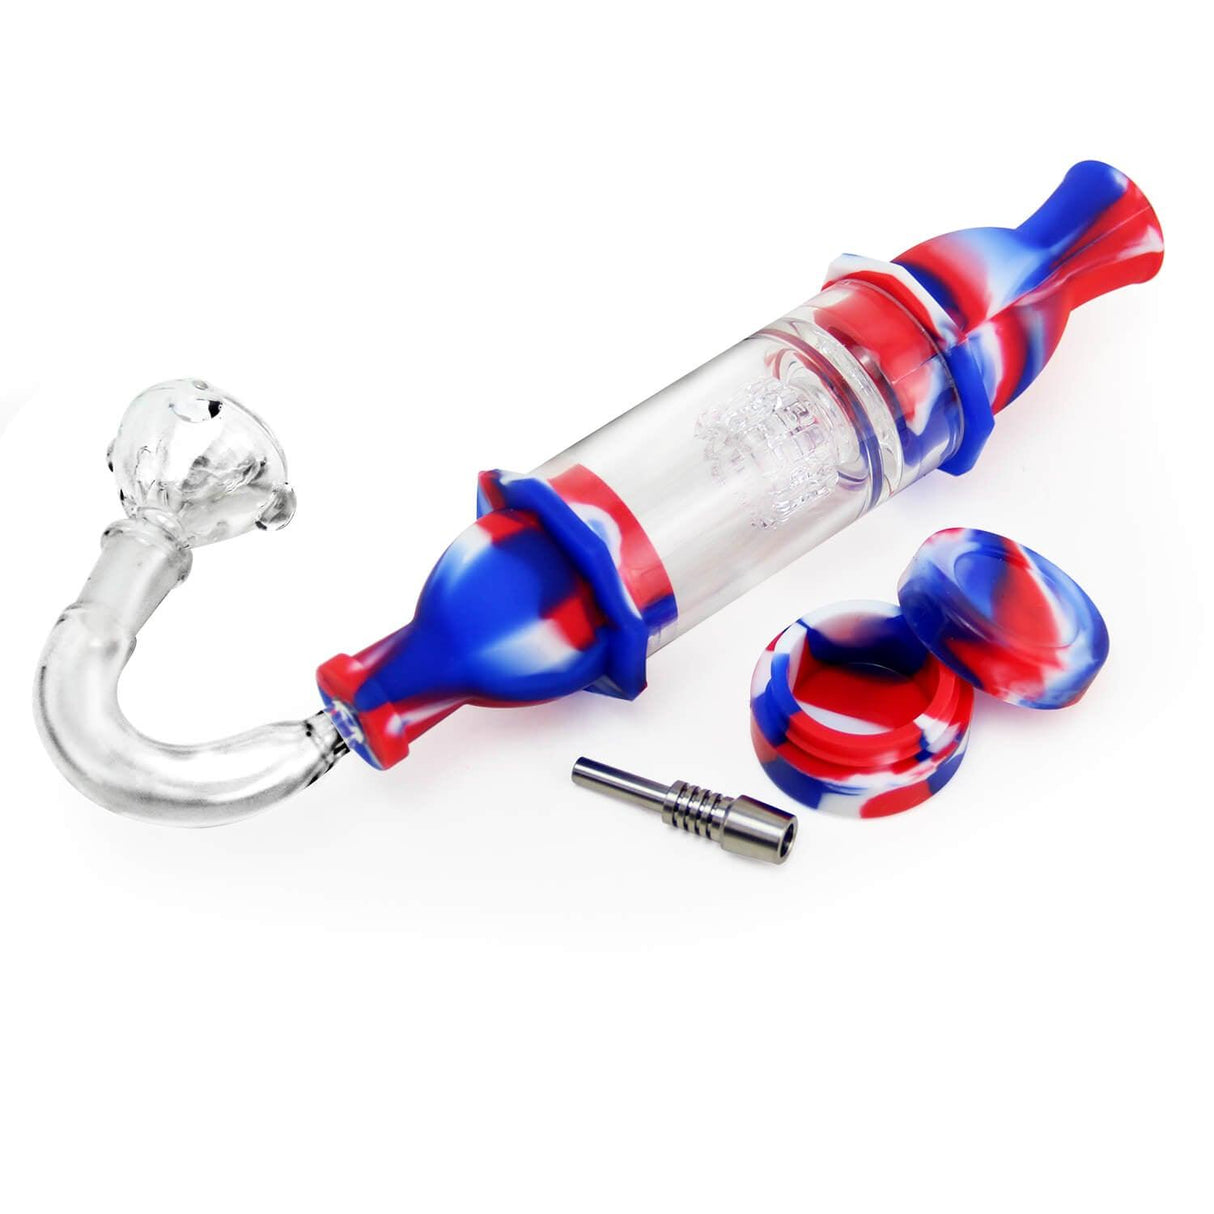 PILOT DIARY Silicone Glass Dab Straw Kit in Red and Blue with Accessories